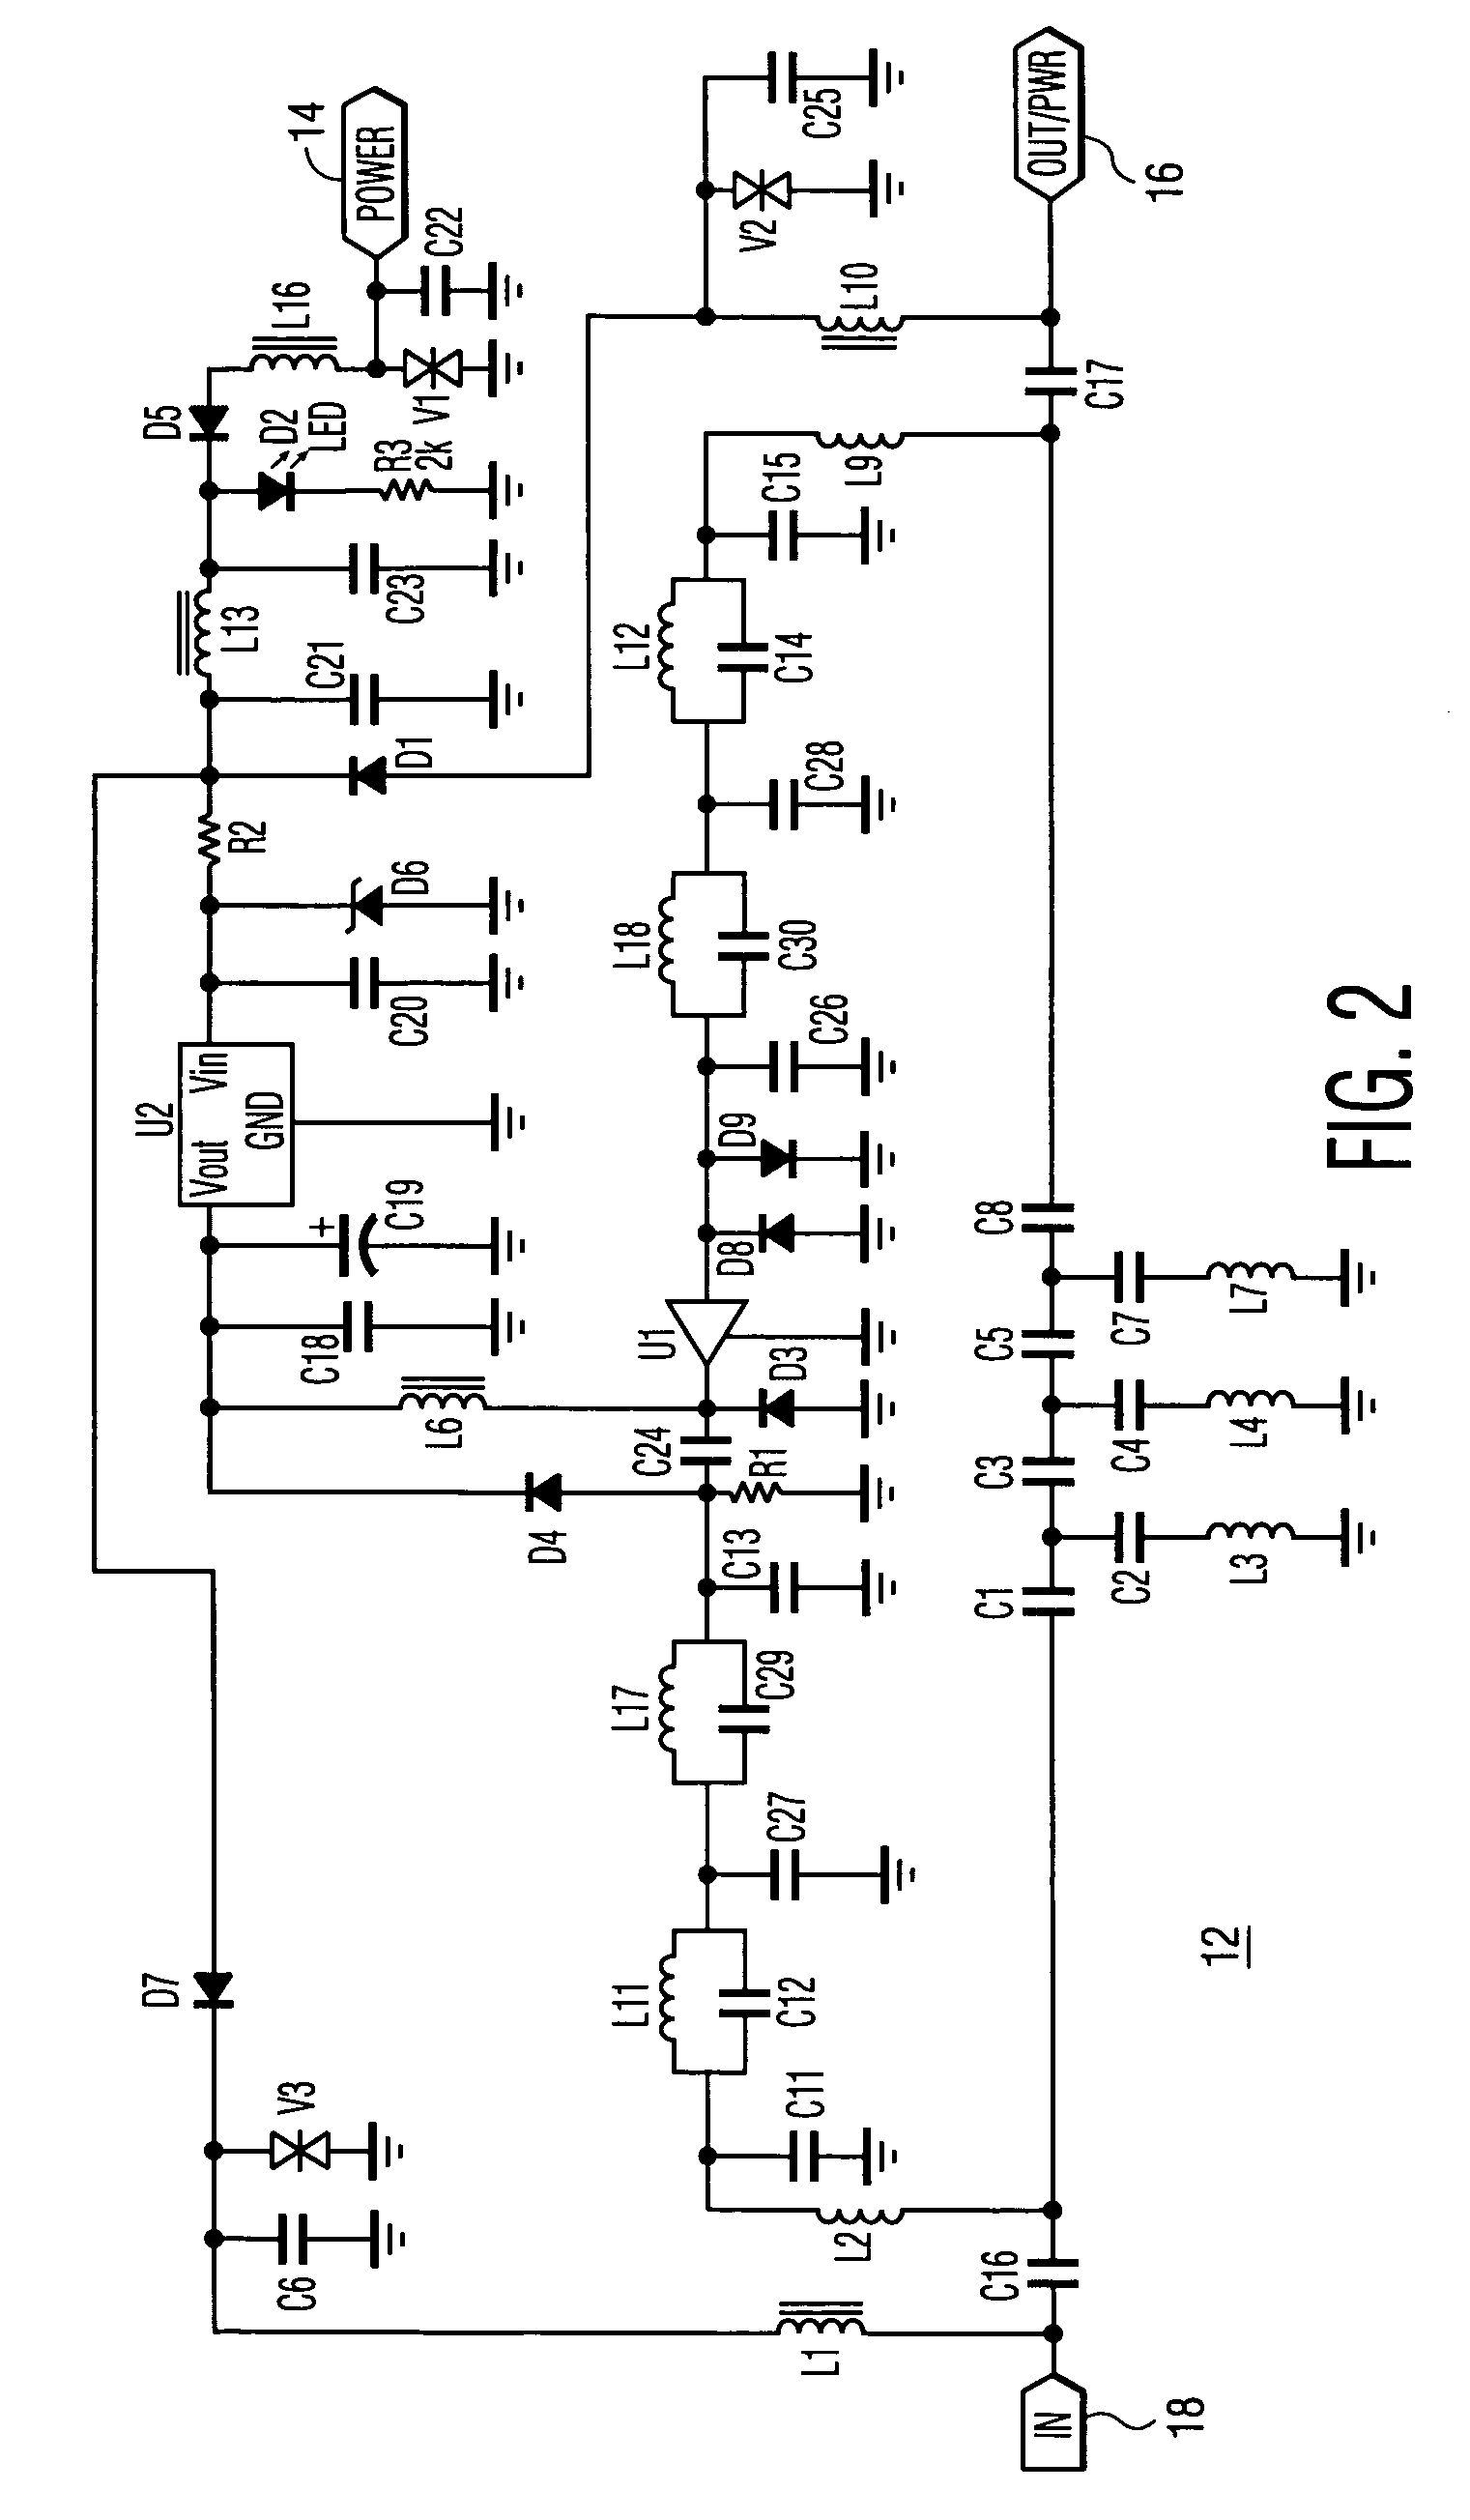 Cable television reverse amplifier